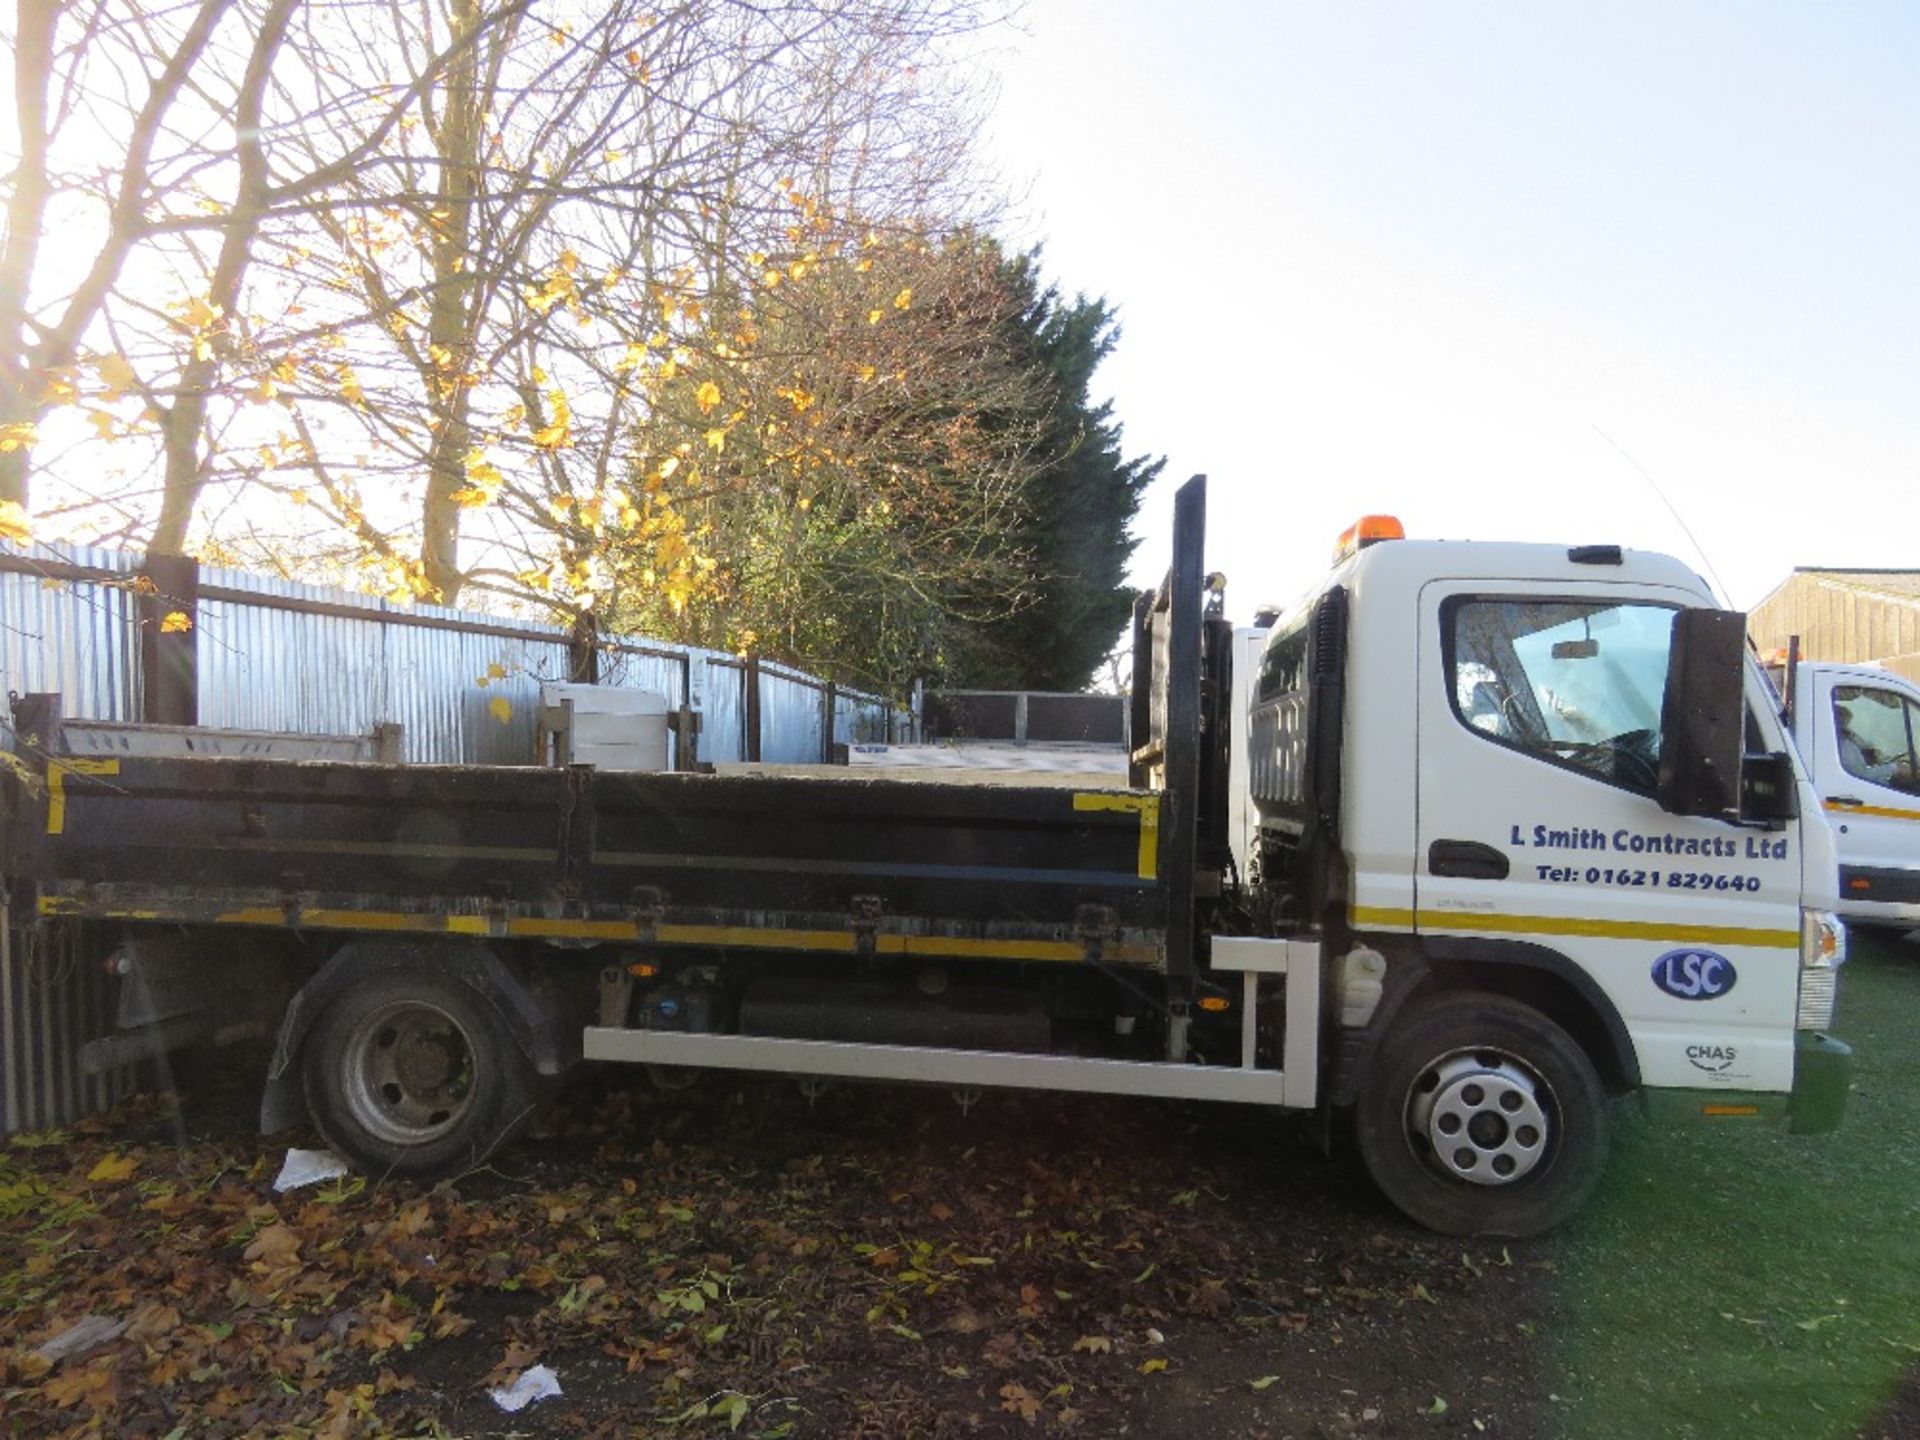 MITSUBISHI CANTER FUSO 7C15 7500KG TIPPER LORRY REG:GN16 HXA. DIRECT FROM LOCAL COMPANY WHO HAVE OWN